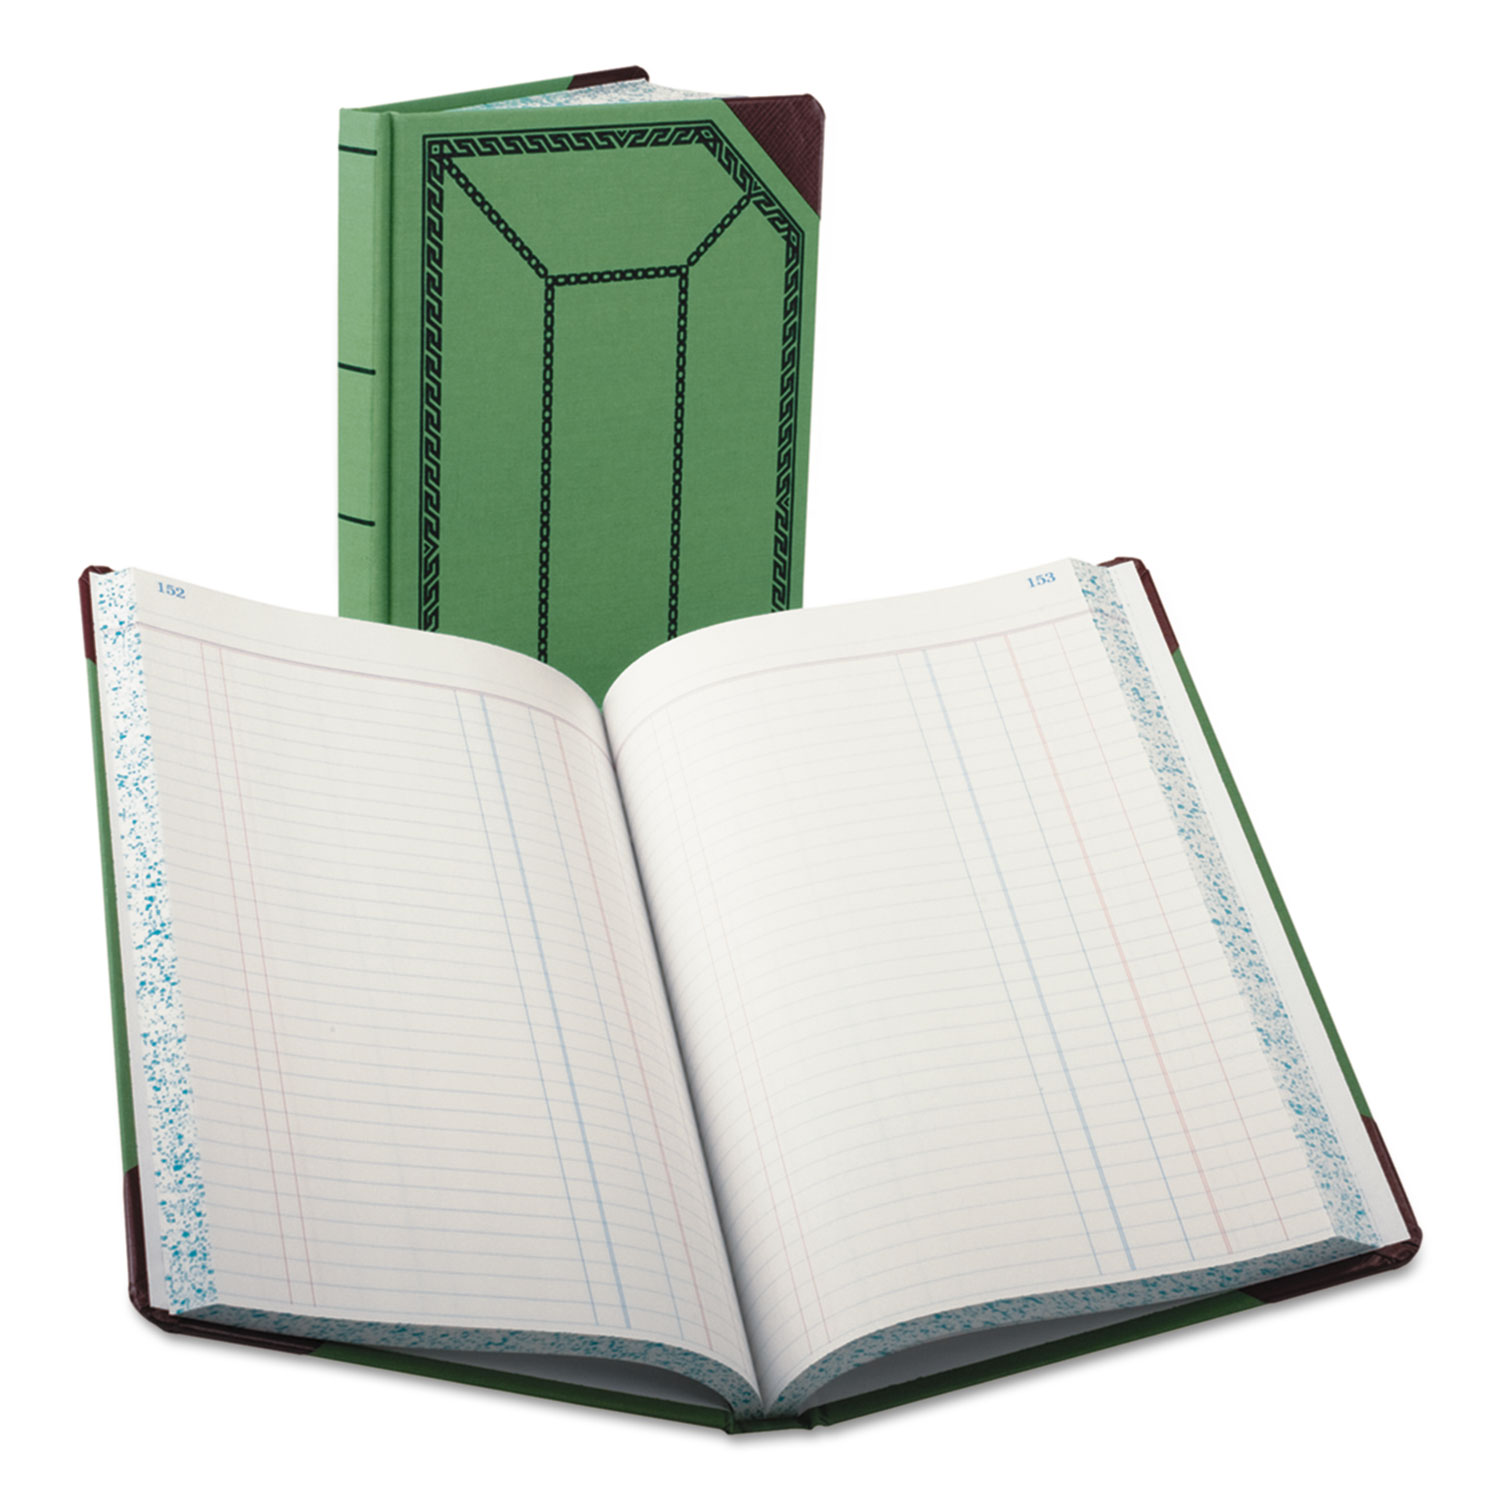  Boorum & Pease 67 1/8-300-J Record/Account Book, Journal Rule, Green/Red, 300 Pages, 12 1/2 x 7 5/8 (BOR6718300J) 